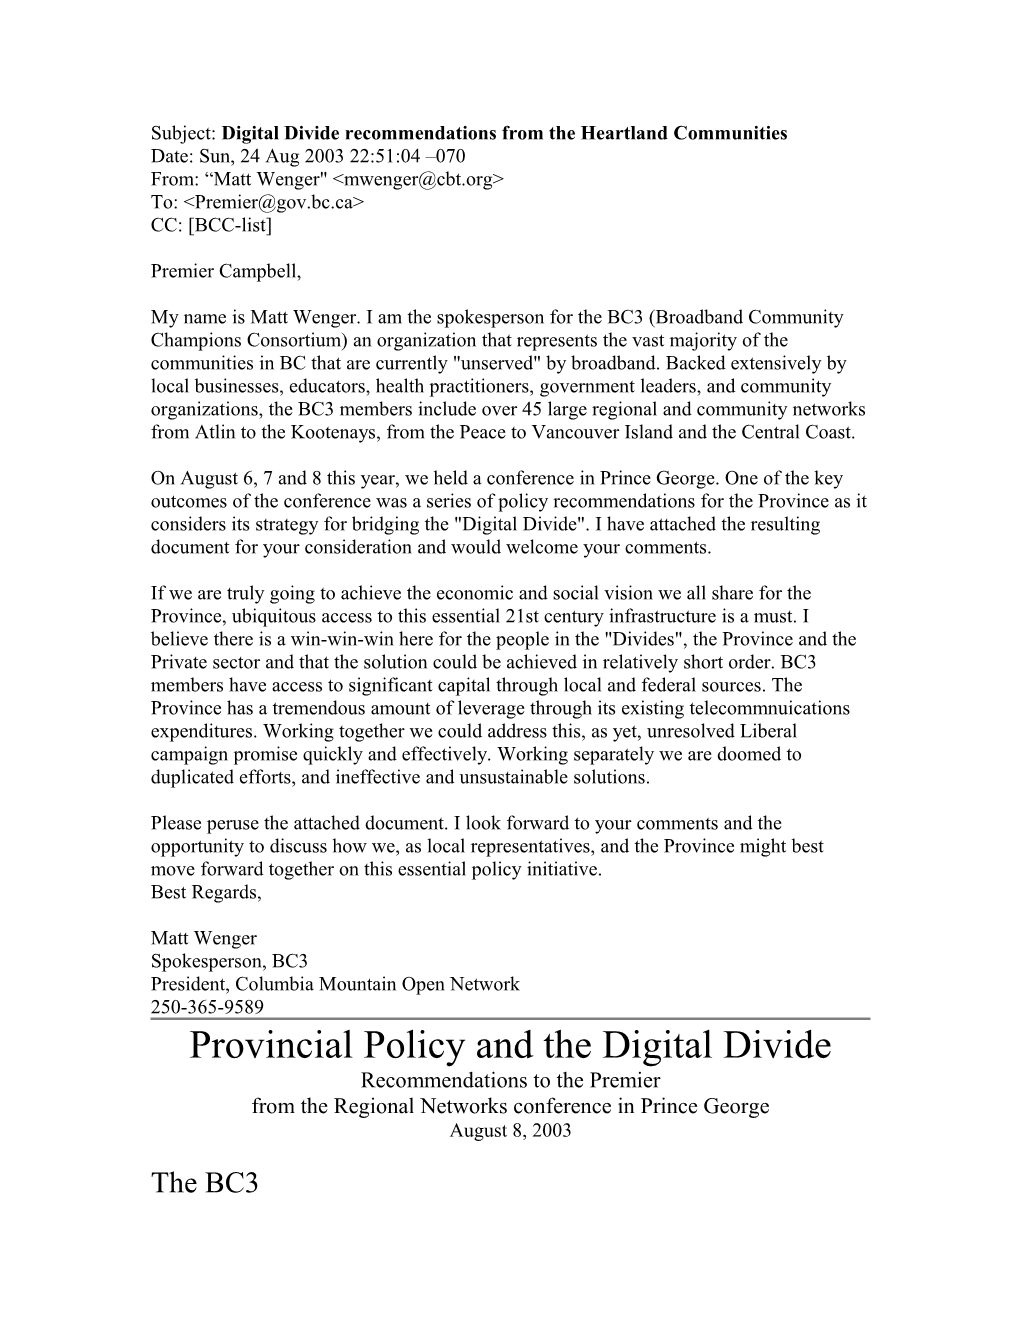 Subject: Digital Divide Recommendations from the Heartland Communities